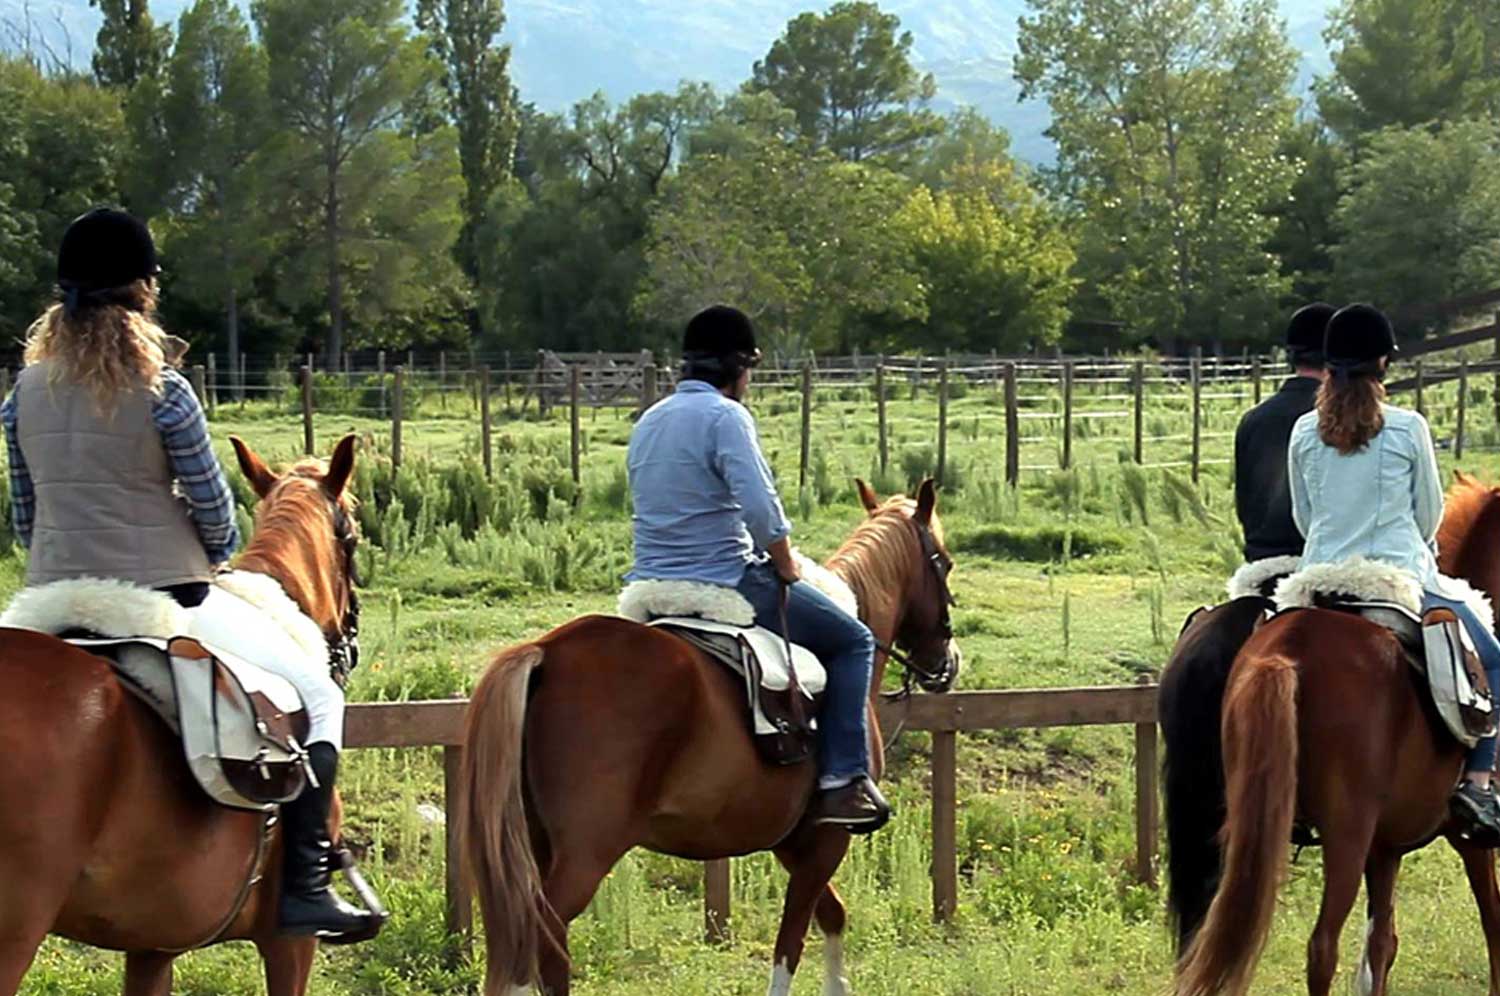 Planning a horseback riding route